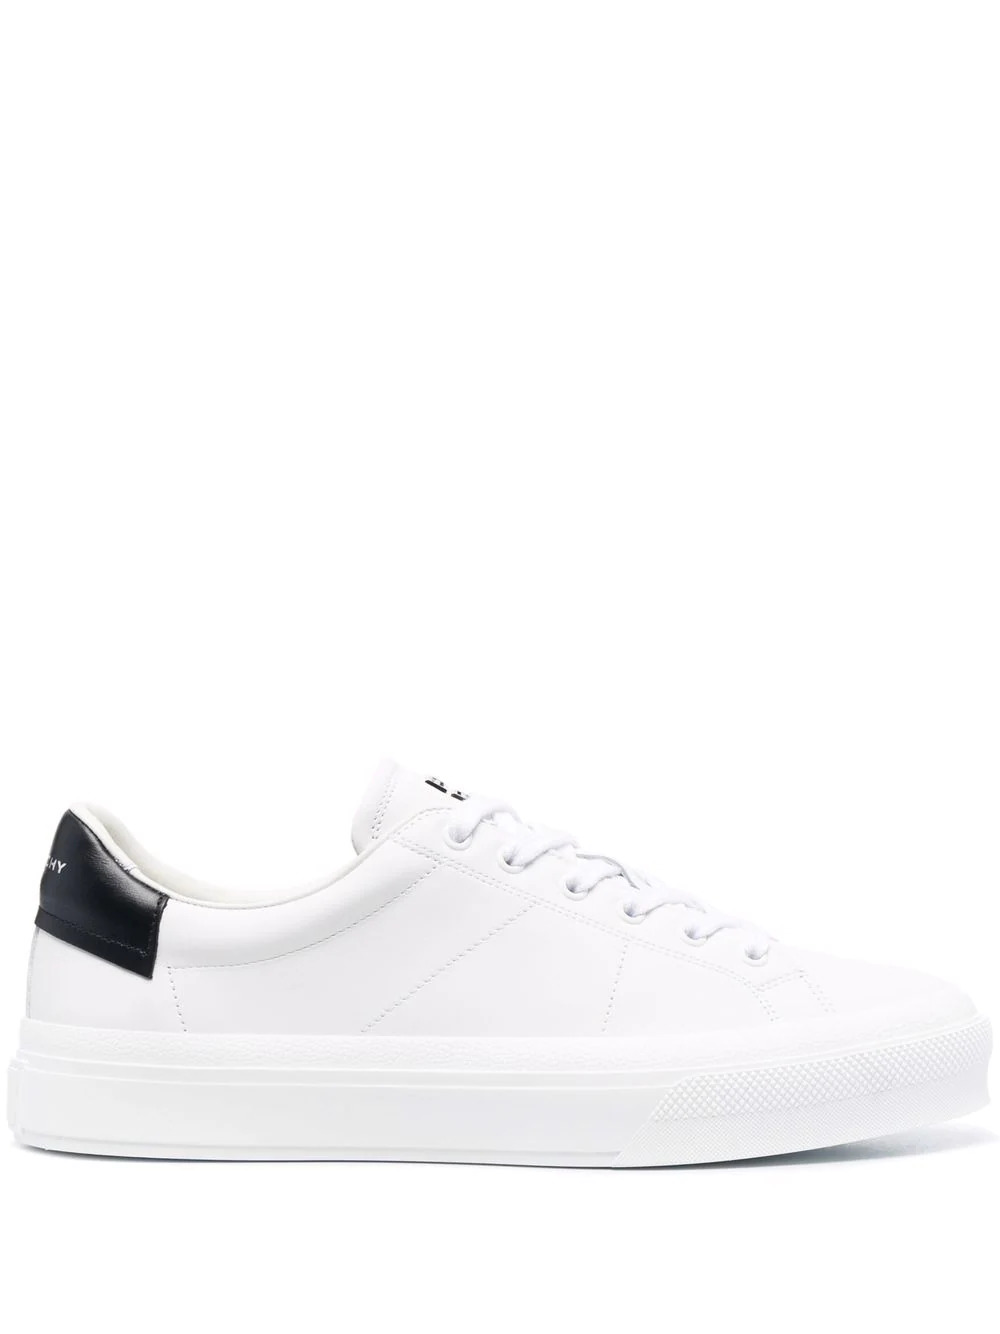 Sneakers City Sport Bianche Con Spoiler Nero GIVENCHY | BH005VH118116